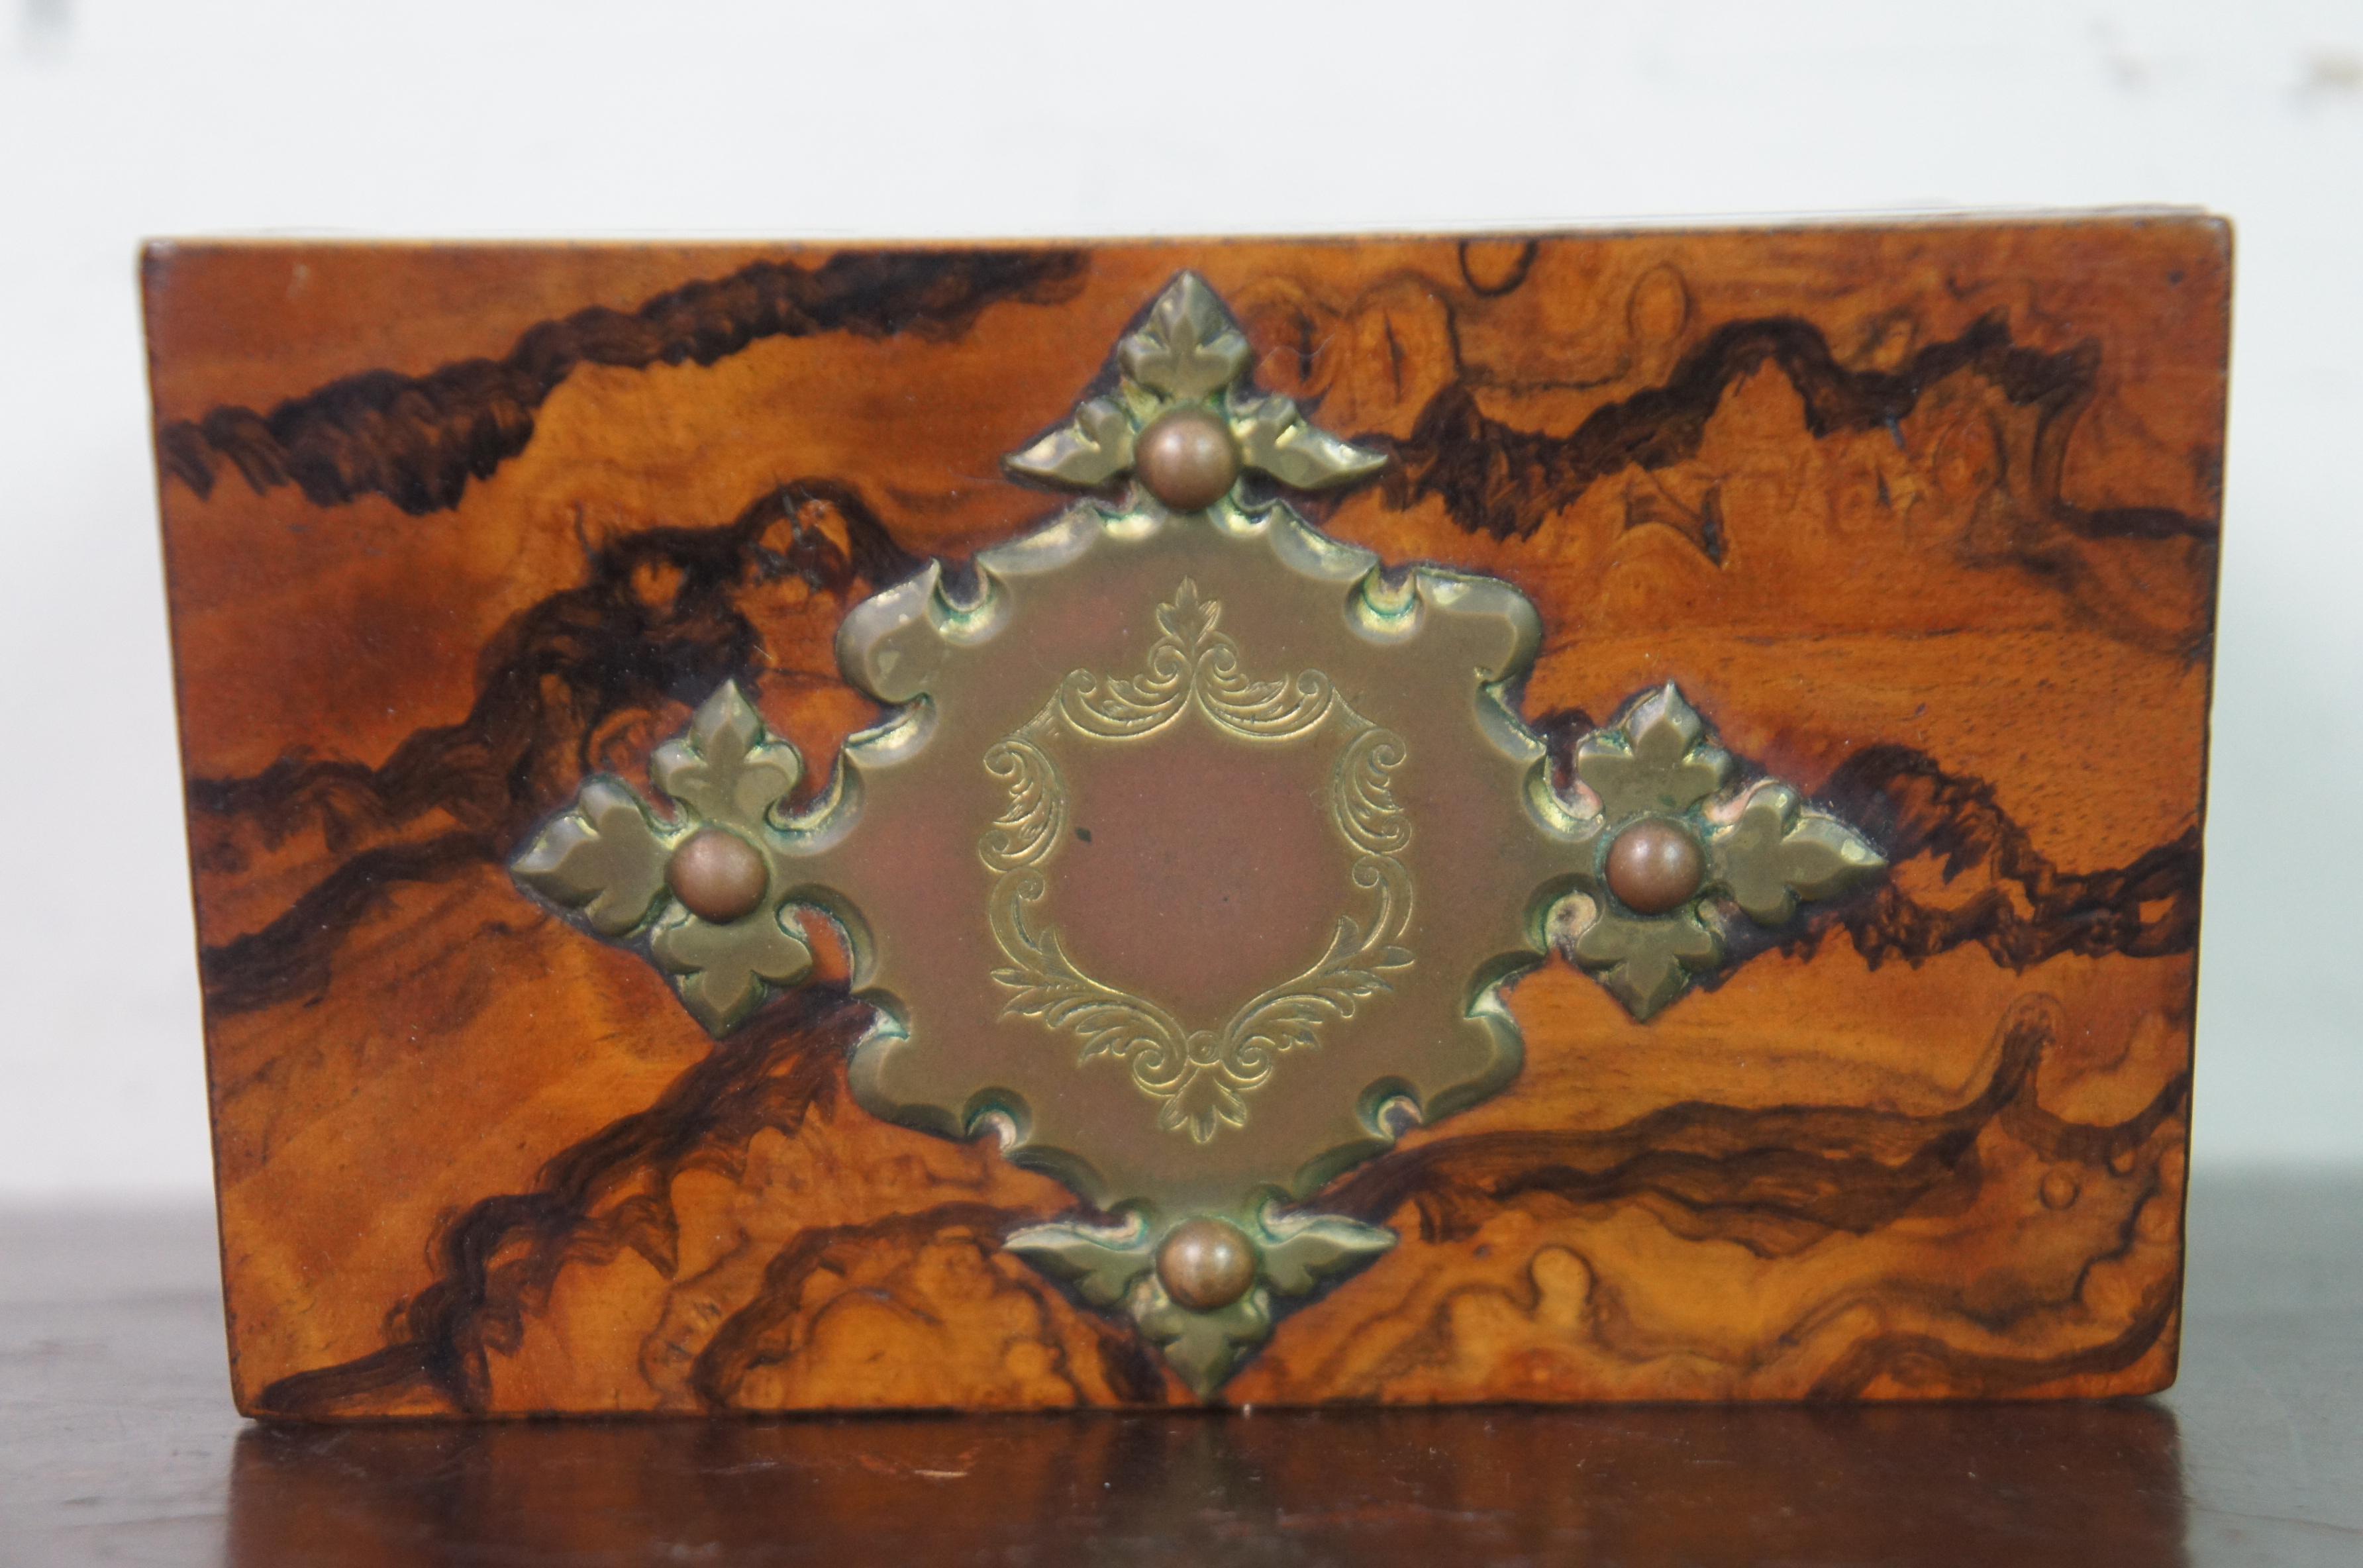 19th Century Antique Victorian Burr Walnut Perfume Bottle Apothecary Caddy Box Casket For Sale